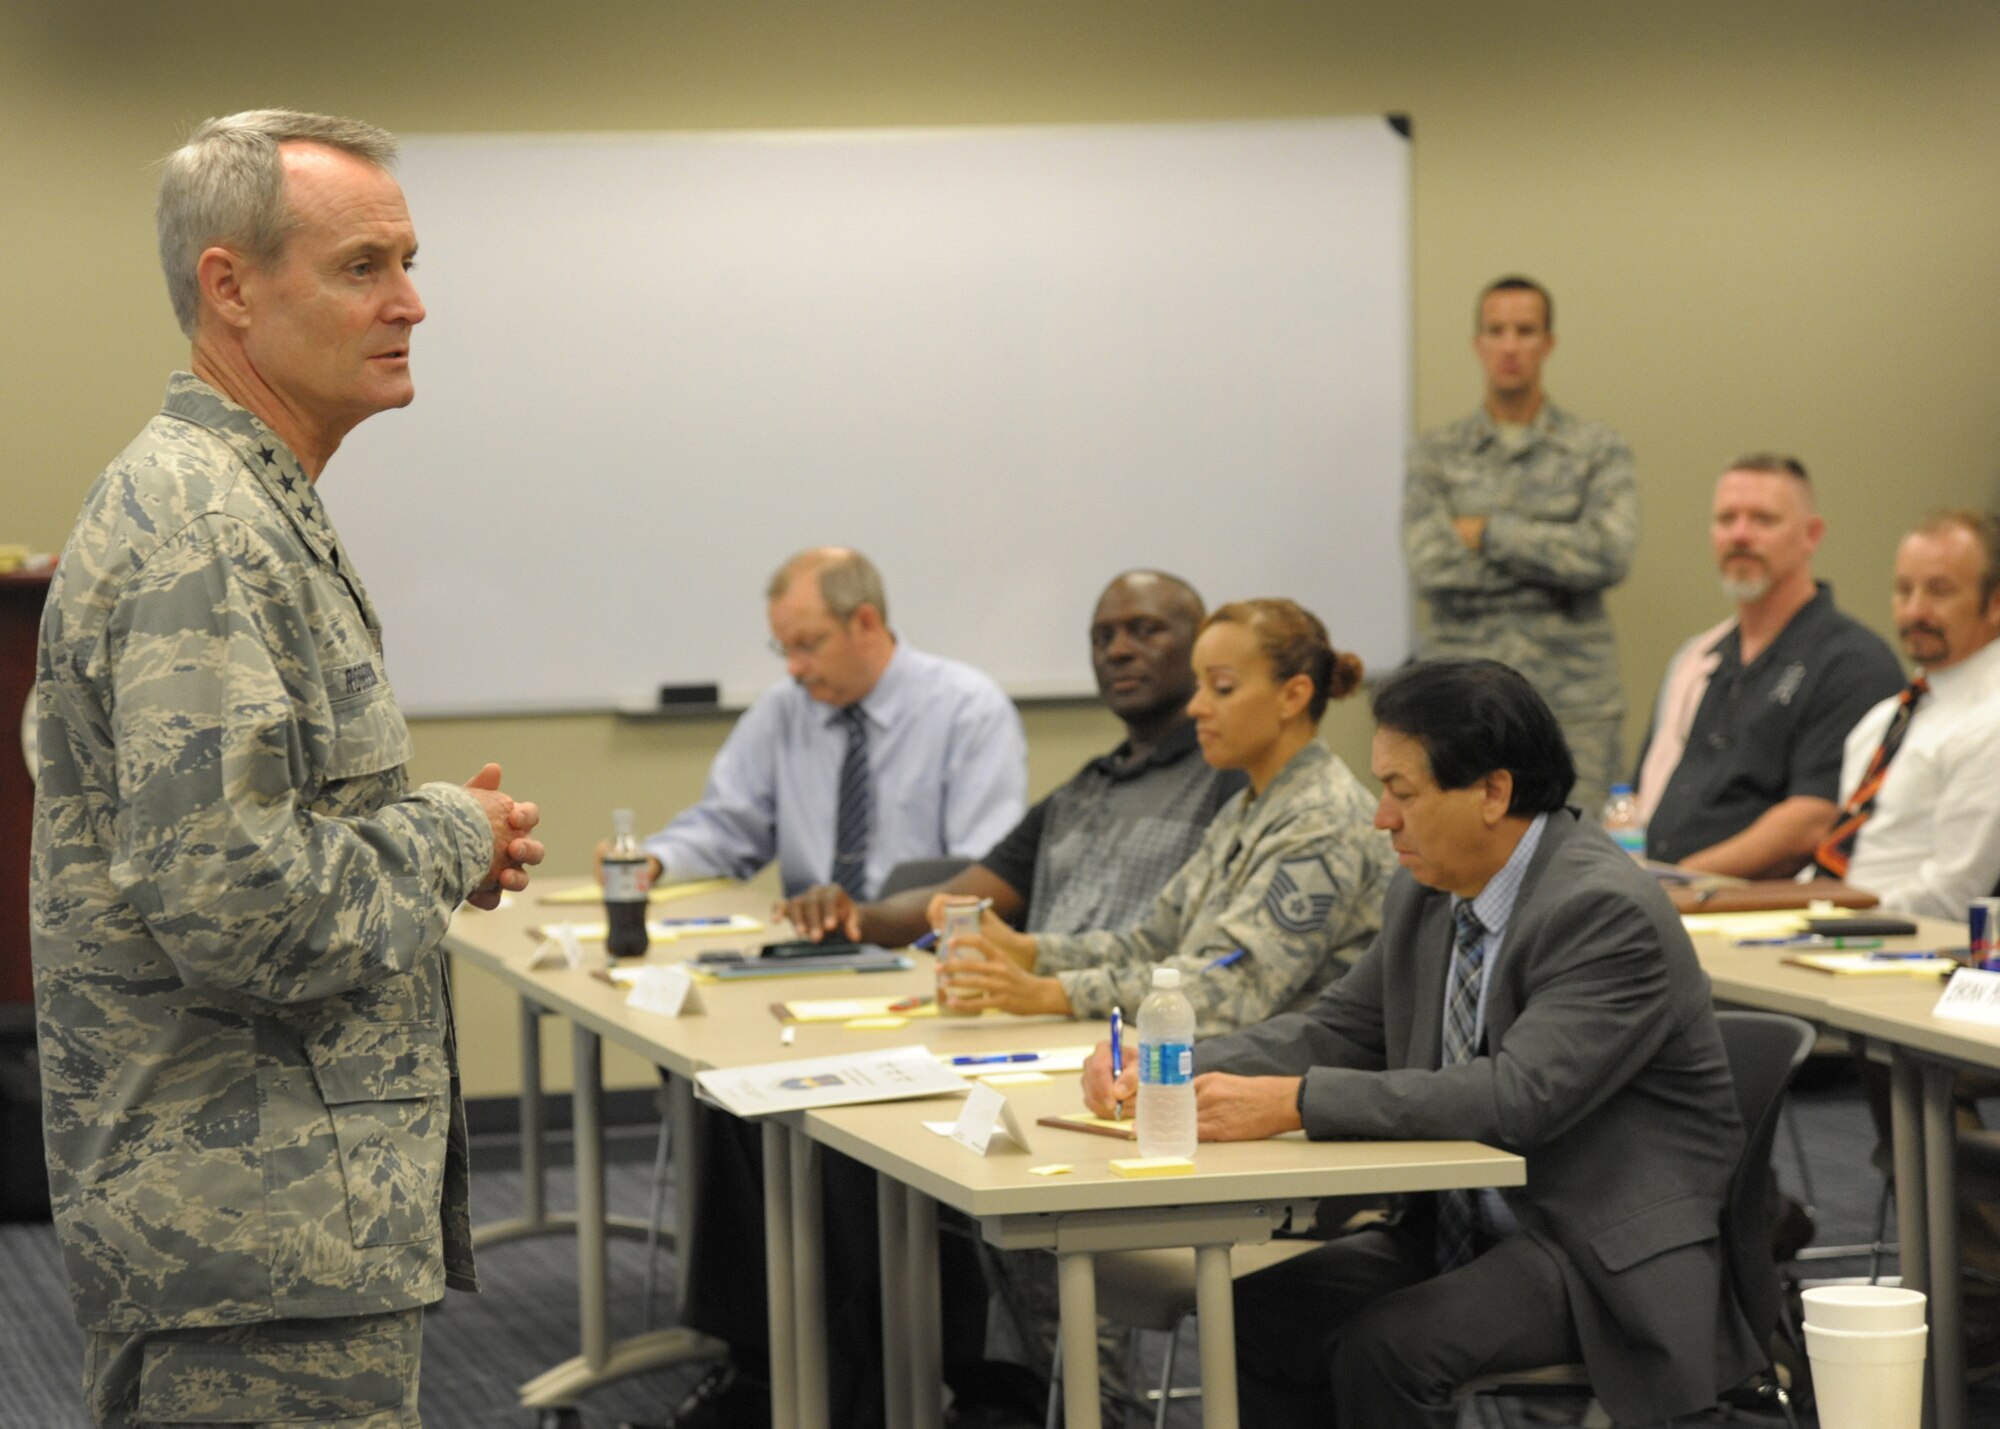 Lt. Gen. Darryl Roberson, commander Air Education and Training Command, speaks to members during the 2016 AETC Wing Process Manager Workshop, July 19 at Joint Base San Antonio-Randolph. The workshop was implemented to develop a standardized and executable plan to improve continuous process improvement and the creation of an innovation culture across AETC.  (U.S. Air Force photo/Joel Martinez)